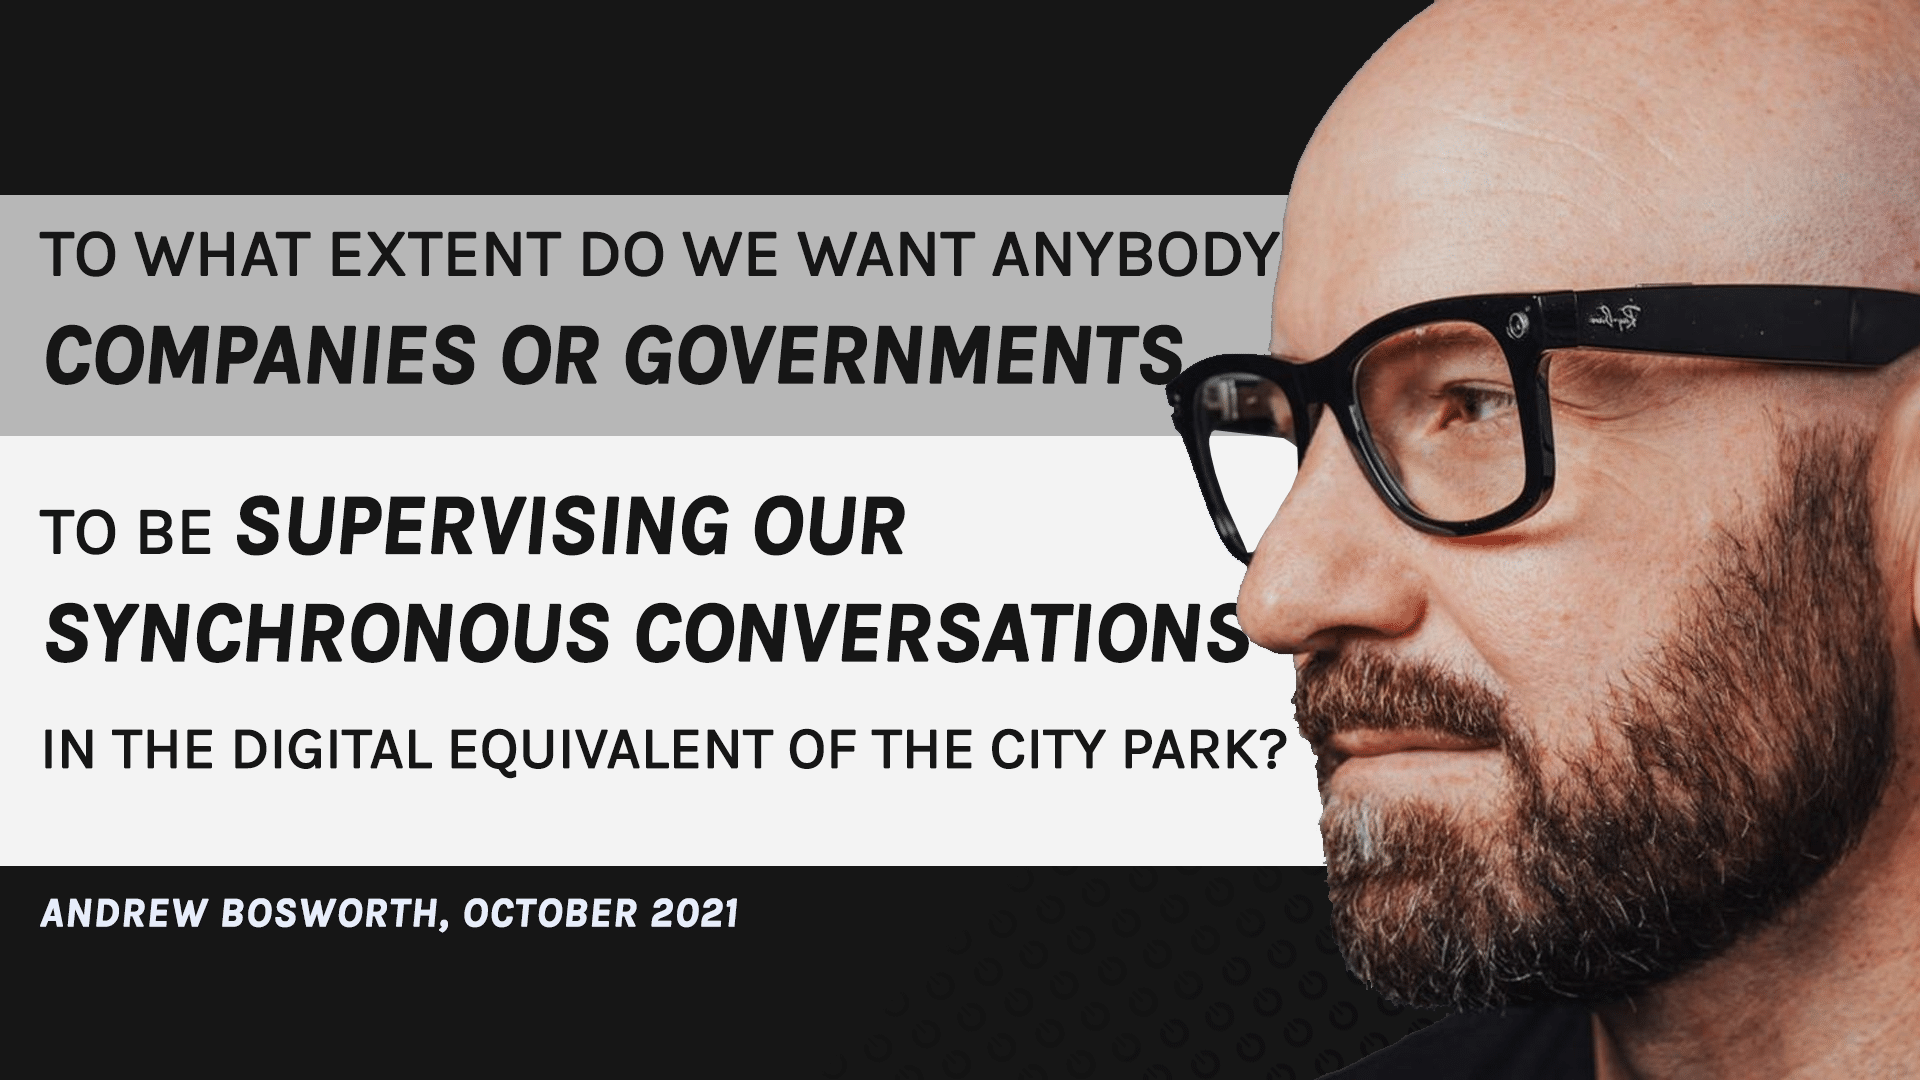 To what extent do we want anybody, companies or governments, to be supervising our synchronous conversations in the digital equivalent of the city park? Andrew Bosworth, October 2021